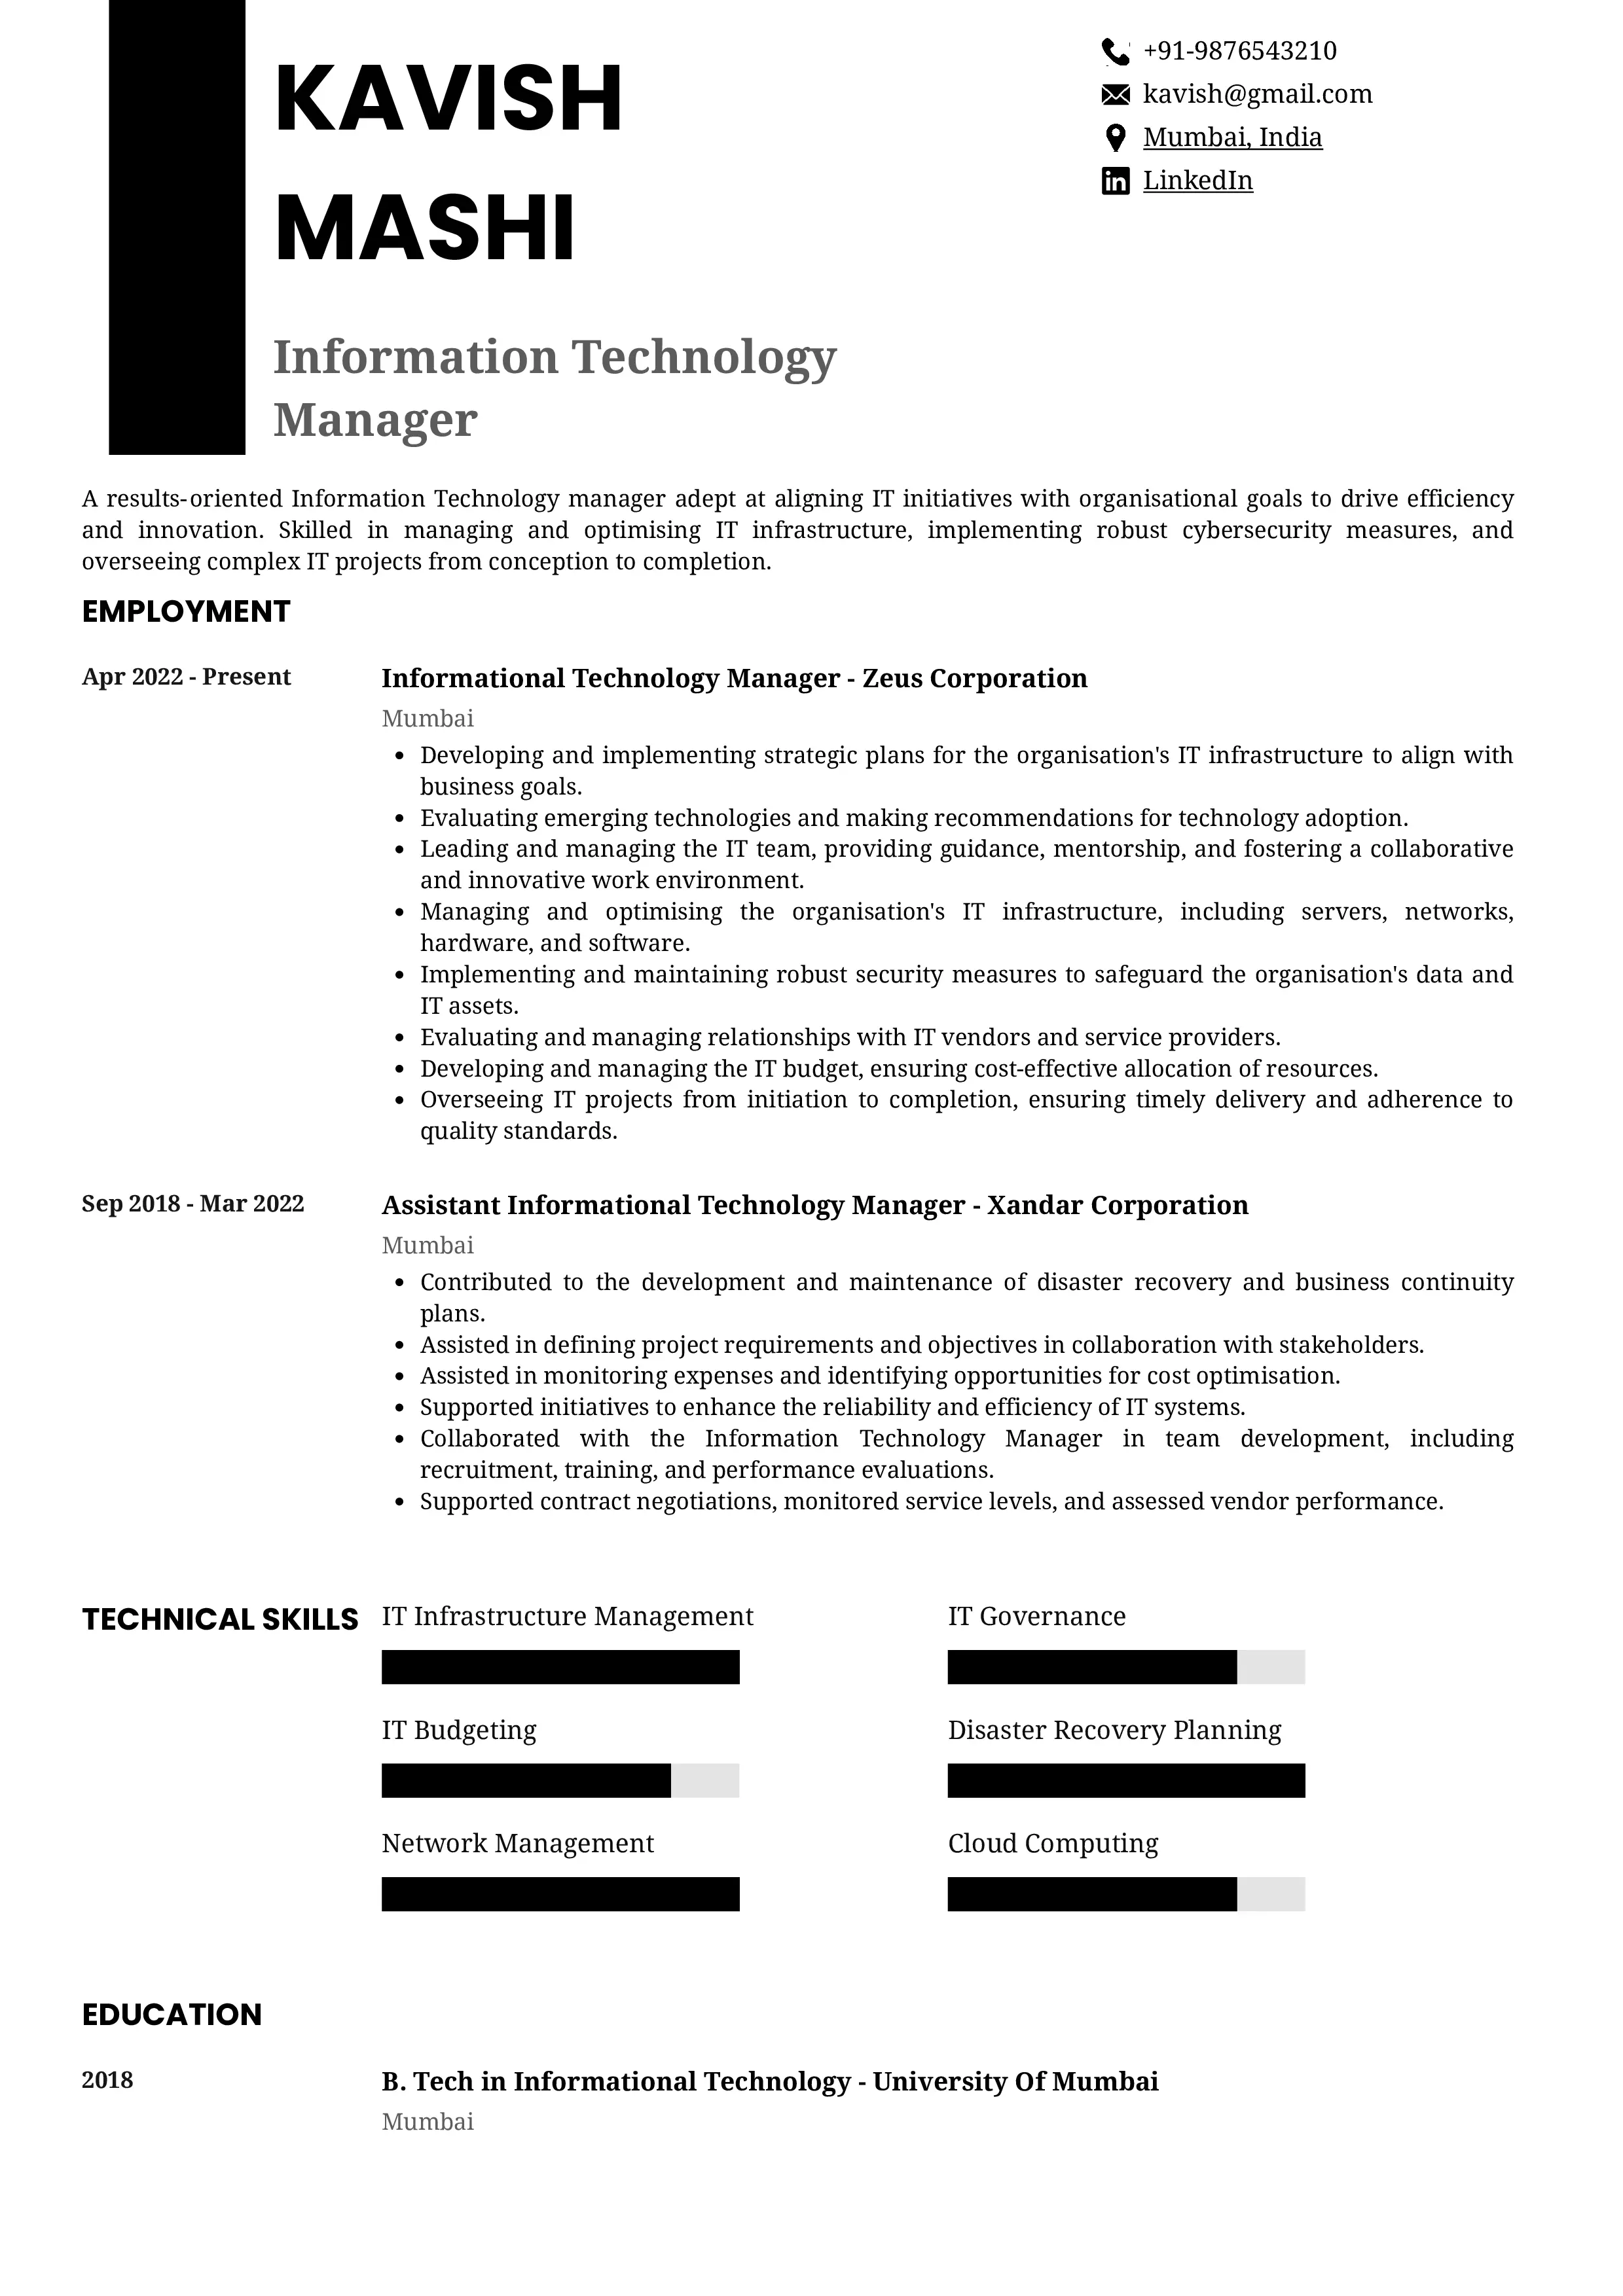 Sample Resume of Information Technology Manager | Free Resume Templates & Samples on Resumod.co